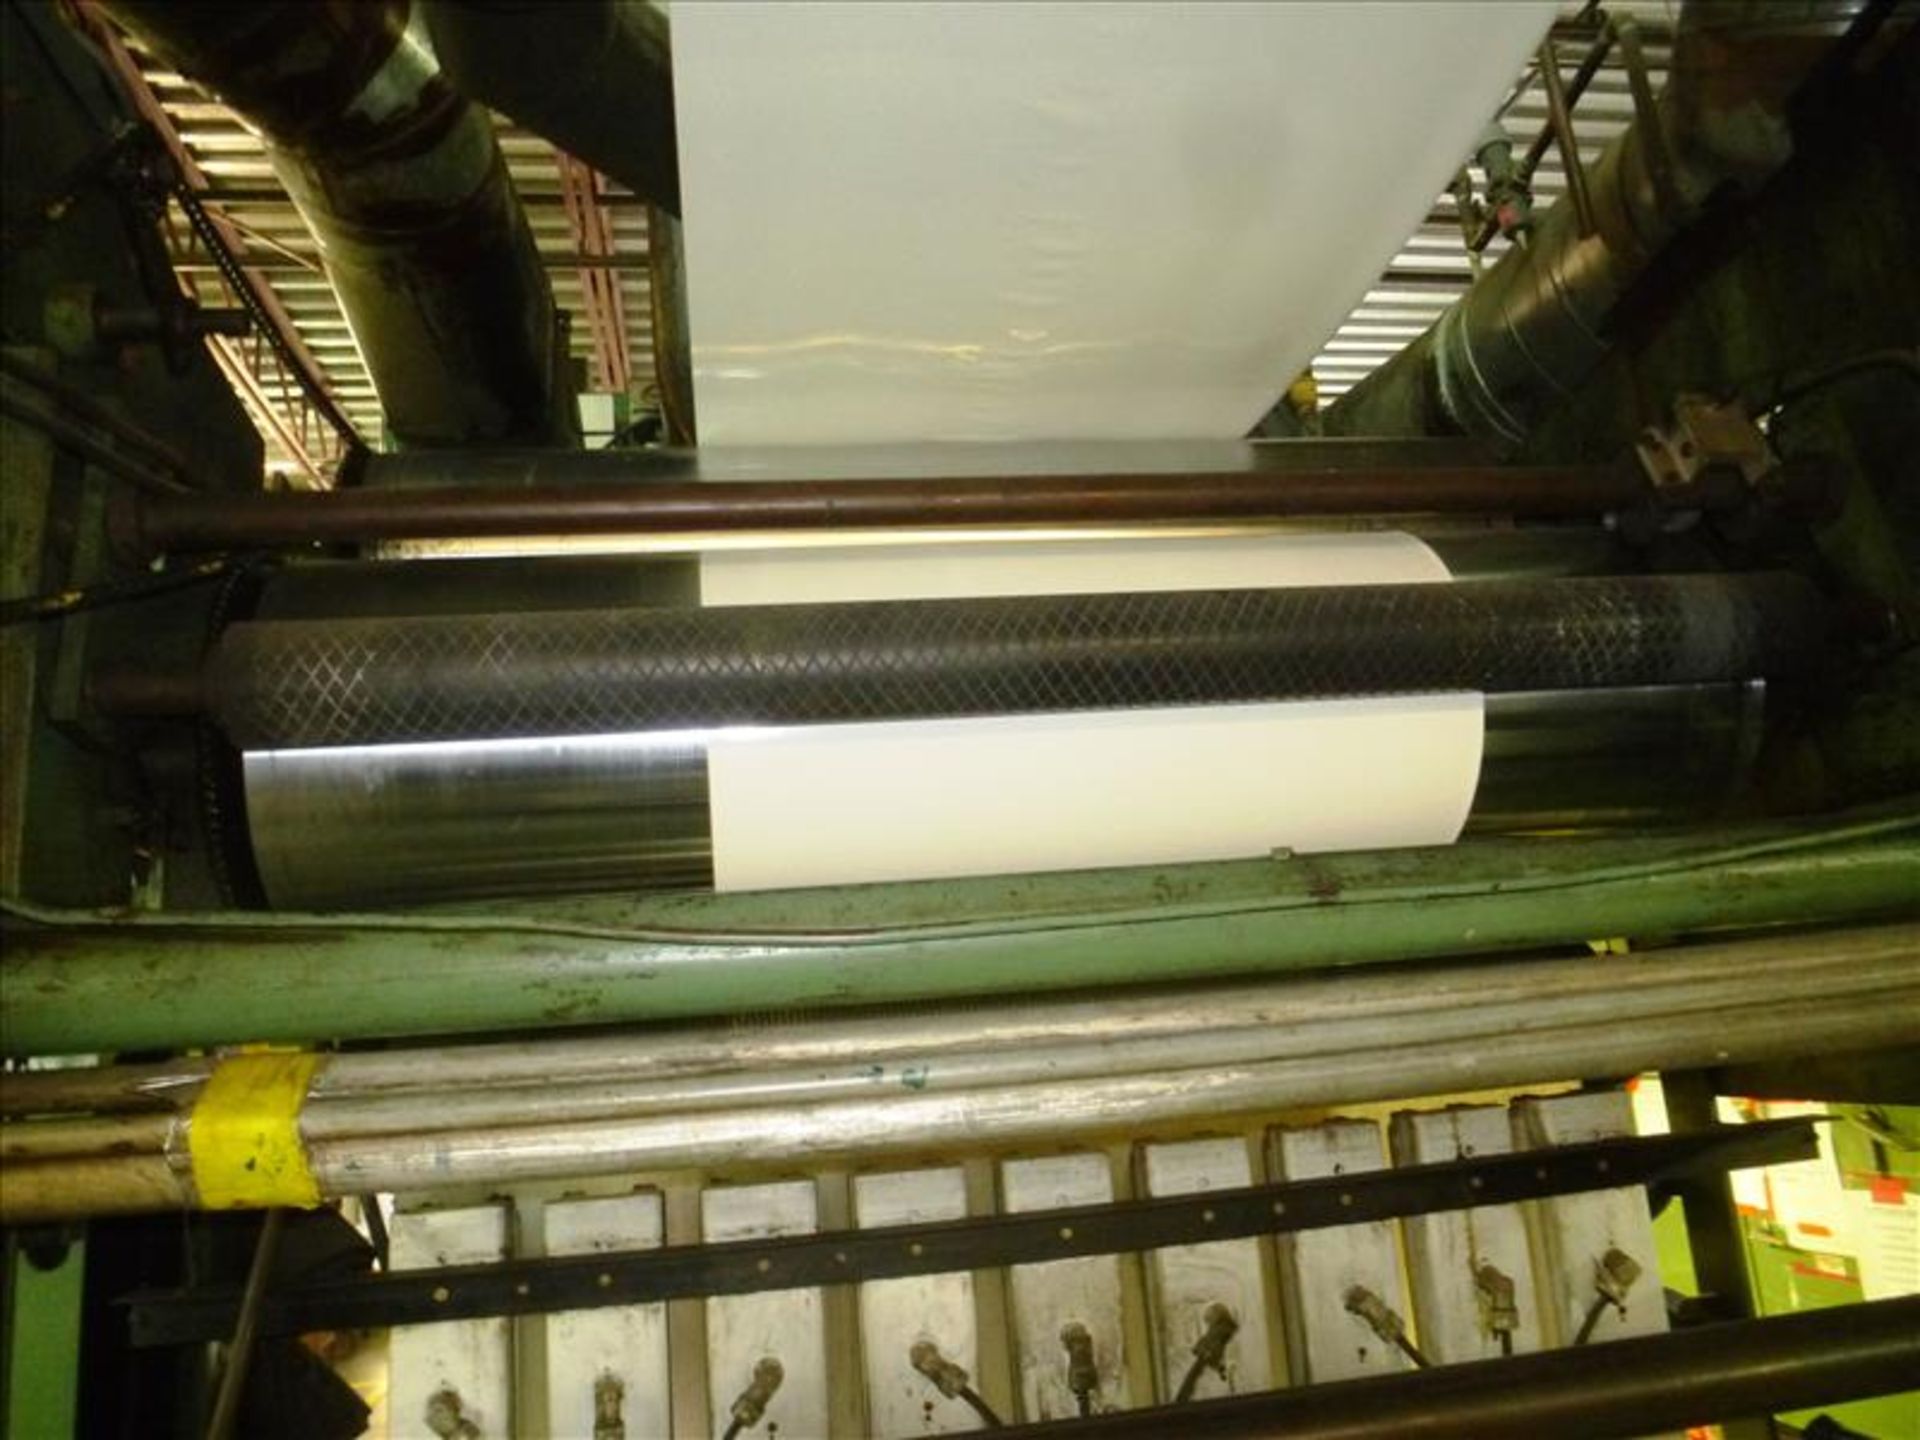 PCMC (Paper Converting Machine Co.) 6-colour central impression flexographic printing press, 56" - Image 13 of 30